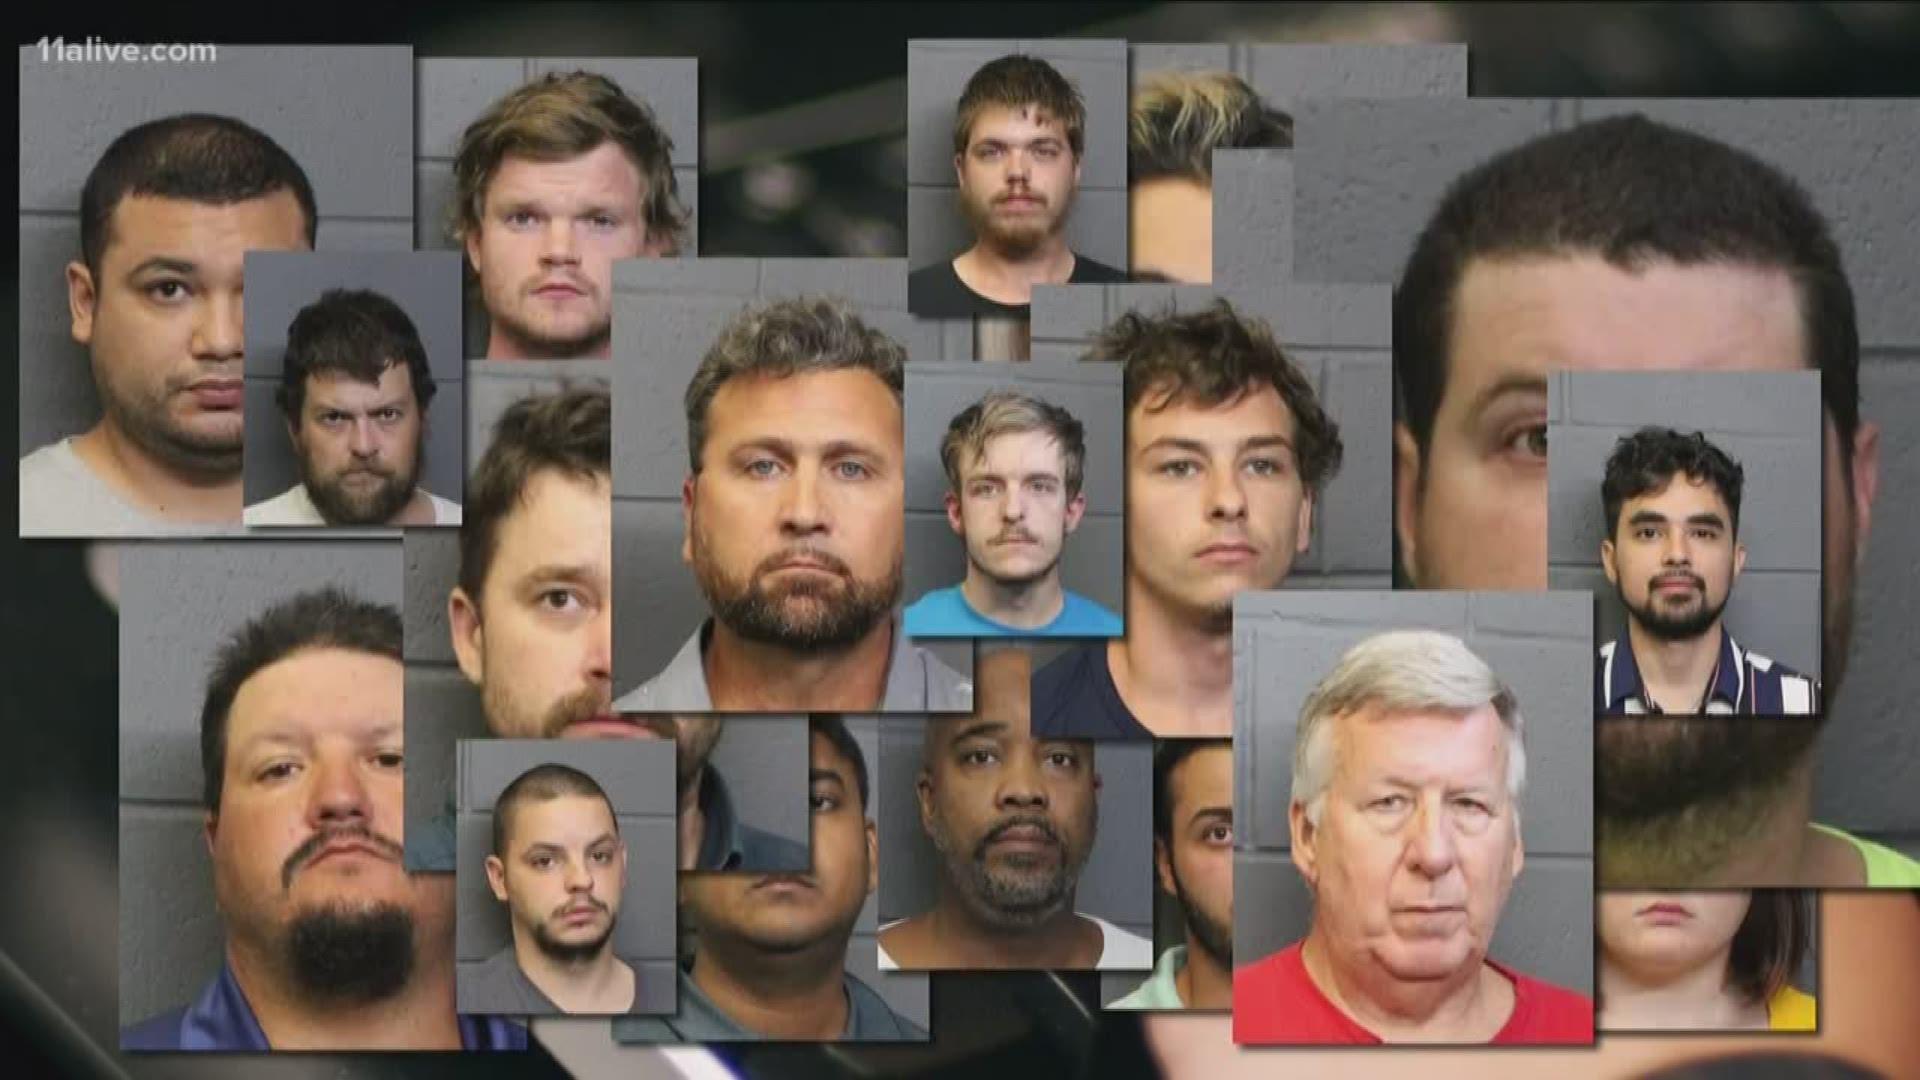 These individuals traveled or were willing to travel to the county for criminal sexual encounters with young children